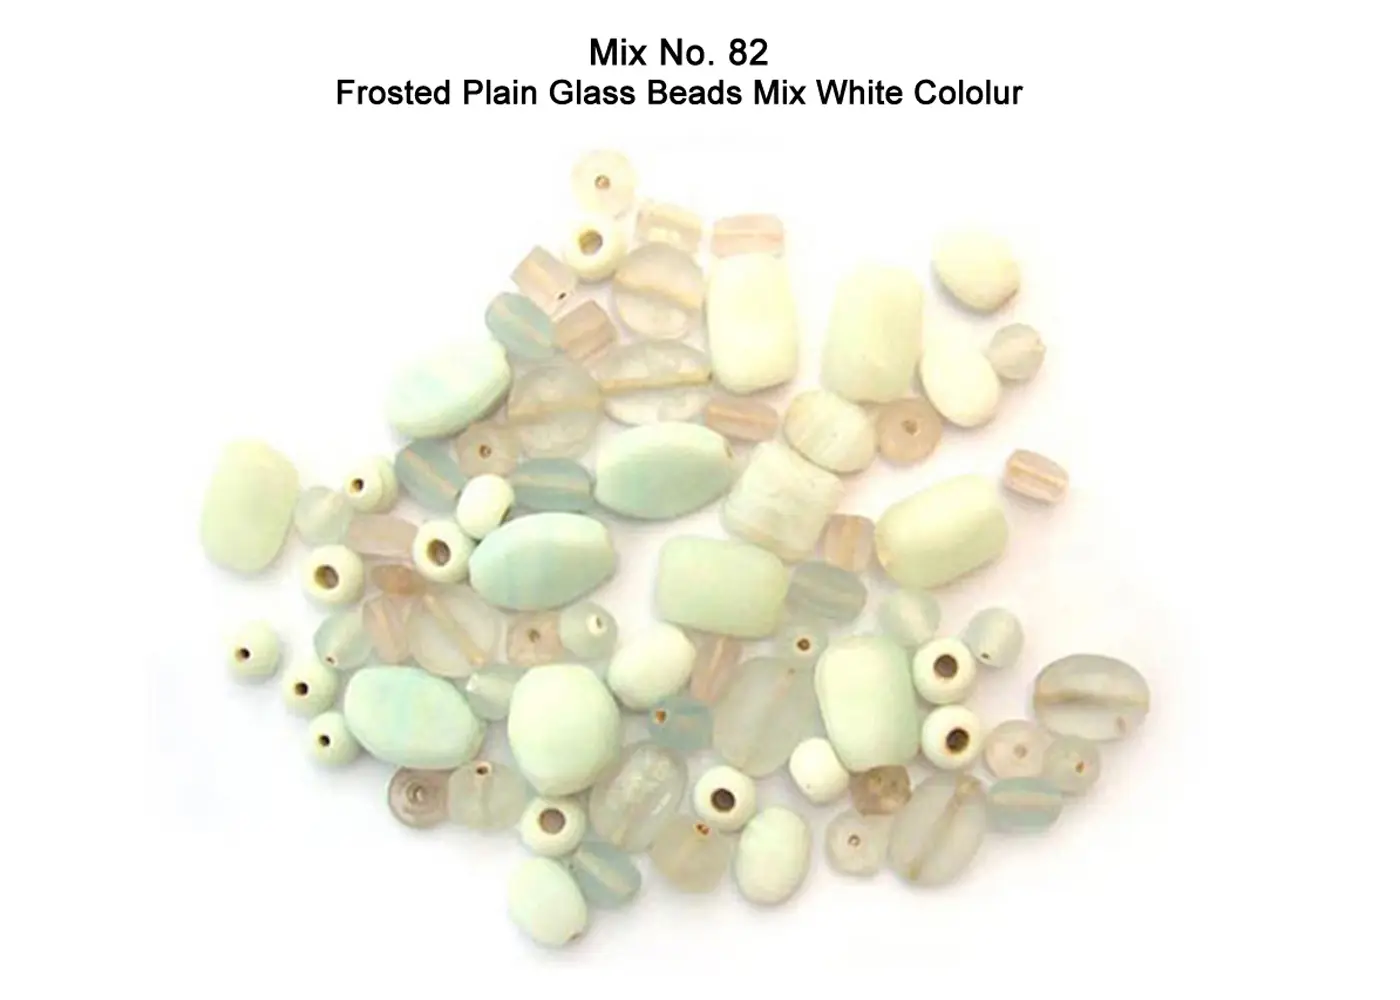 Frosted Plain beads in White color